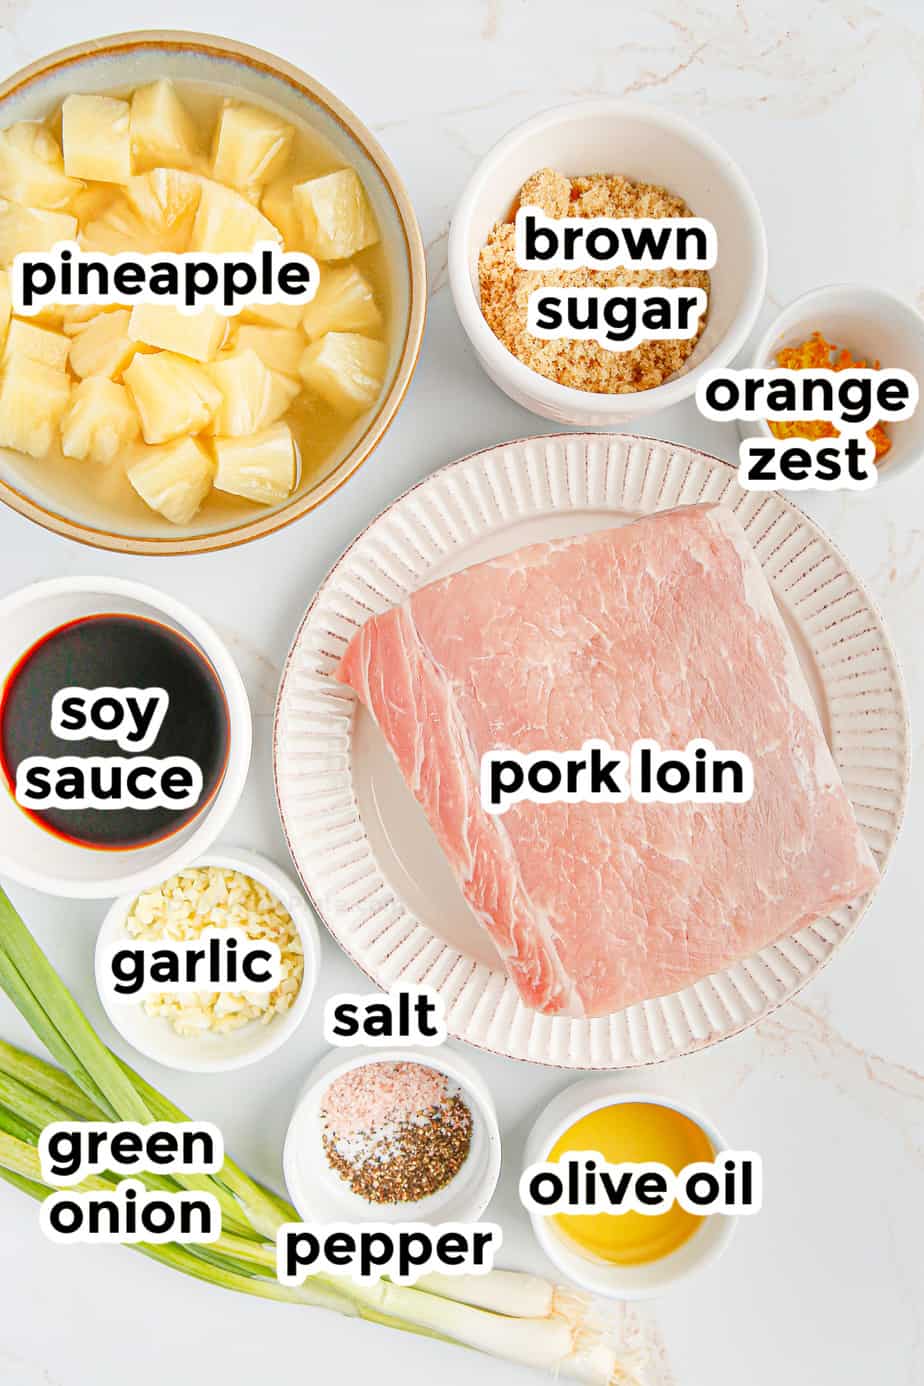 Ingredients in bowls with labels for pineapple pork loin